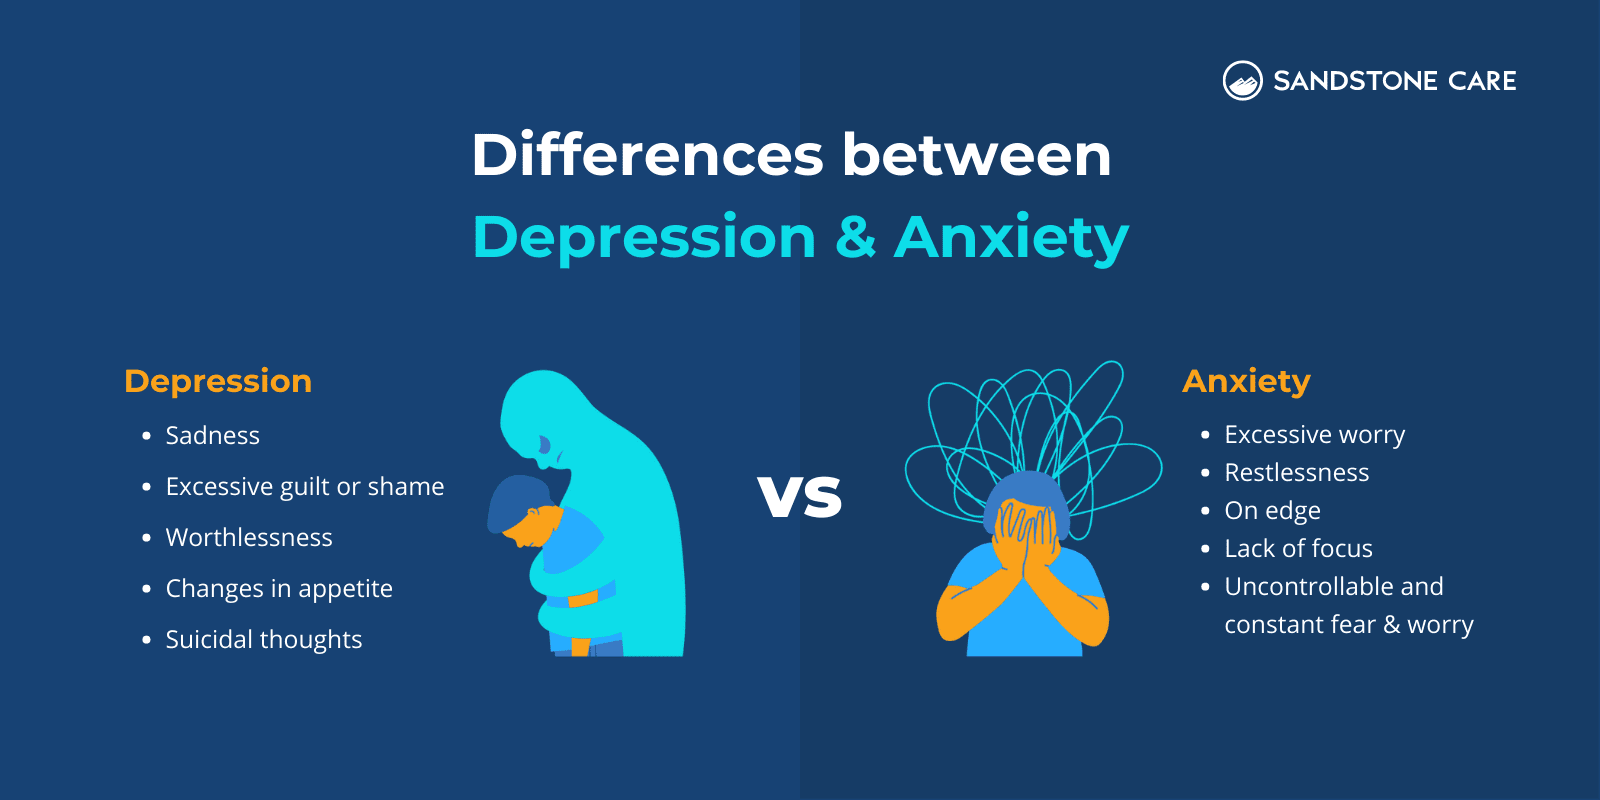 Differences between Depression & Anxiety illustrated with relevant digital illustration